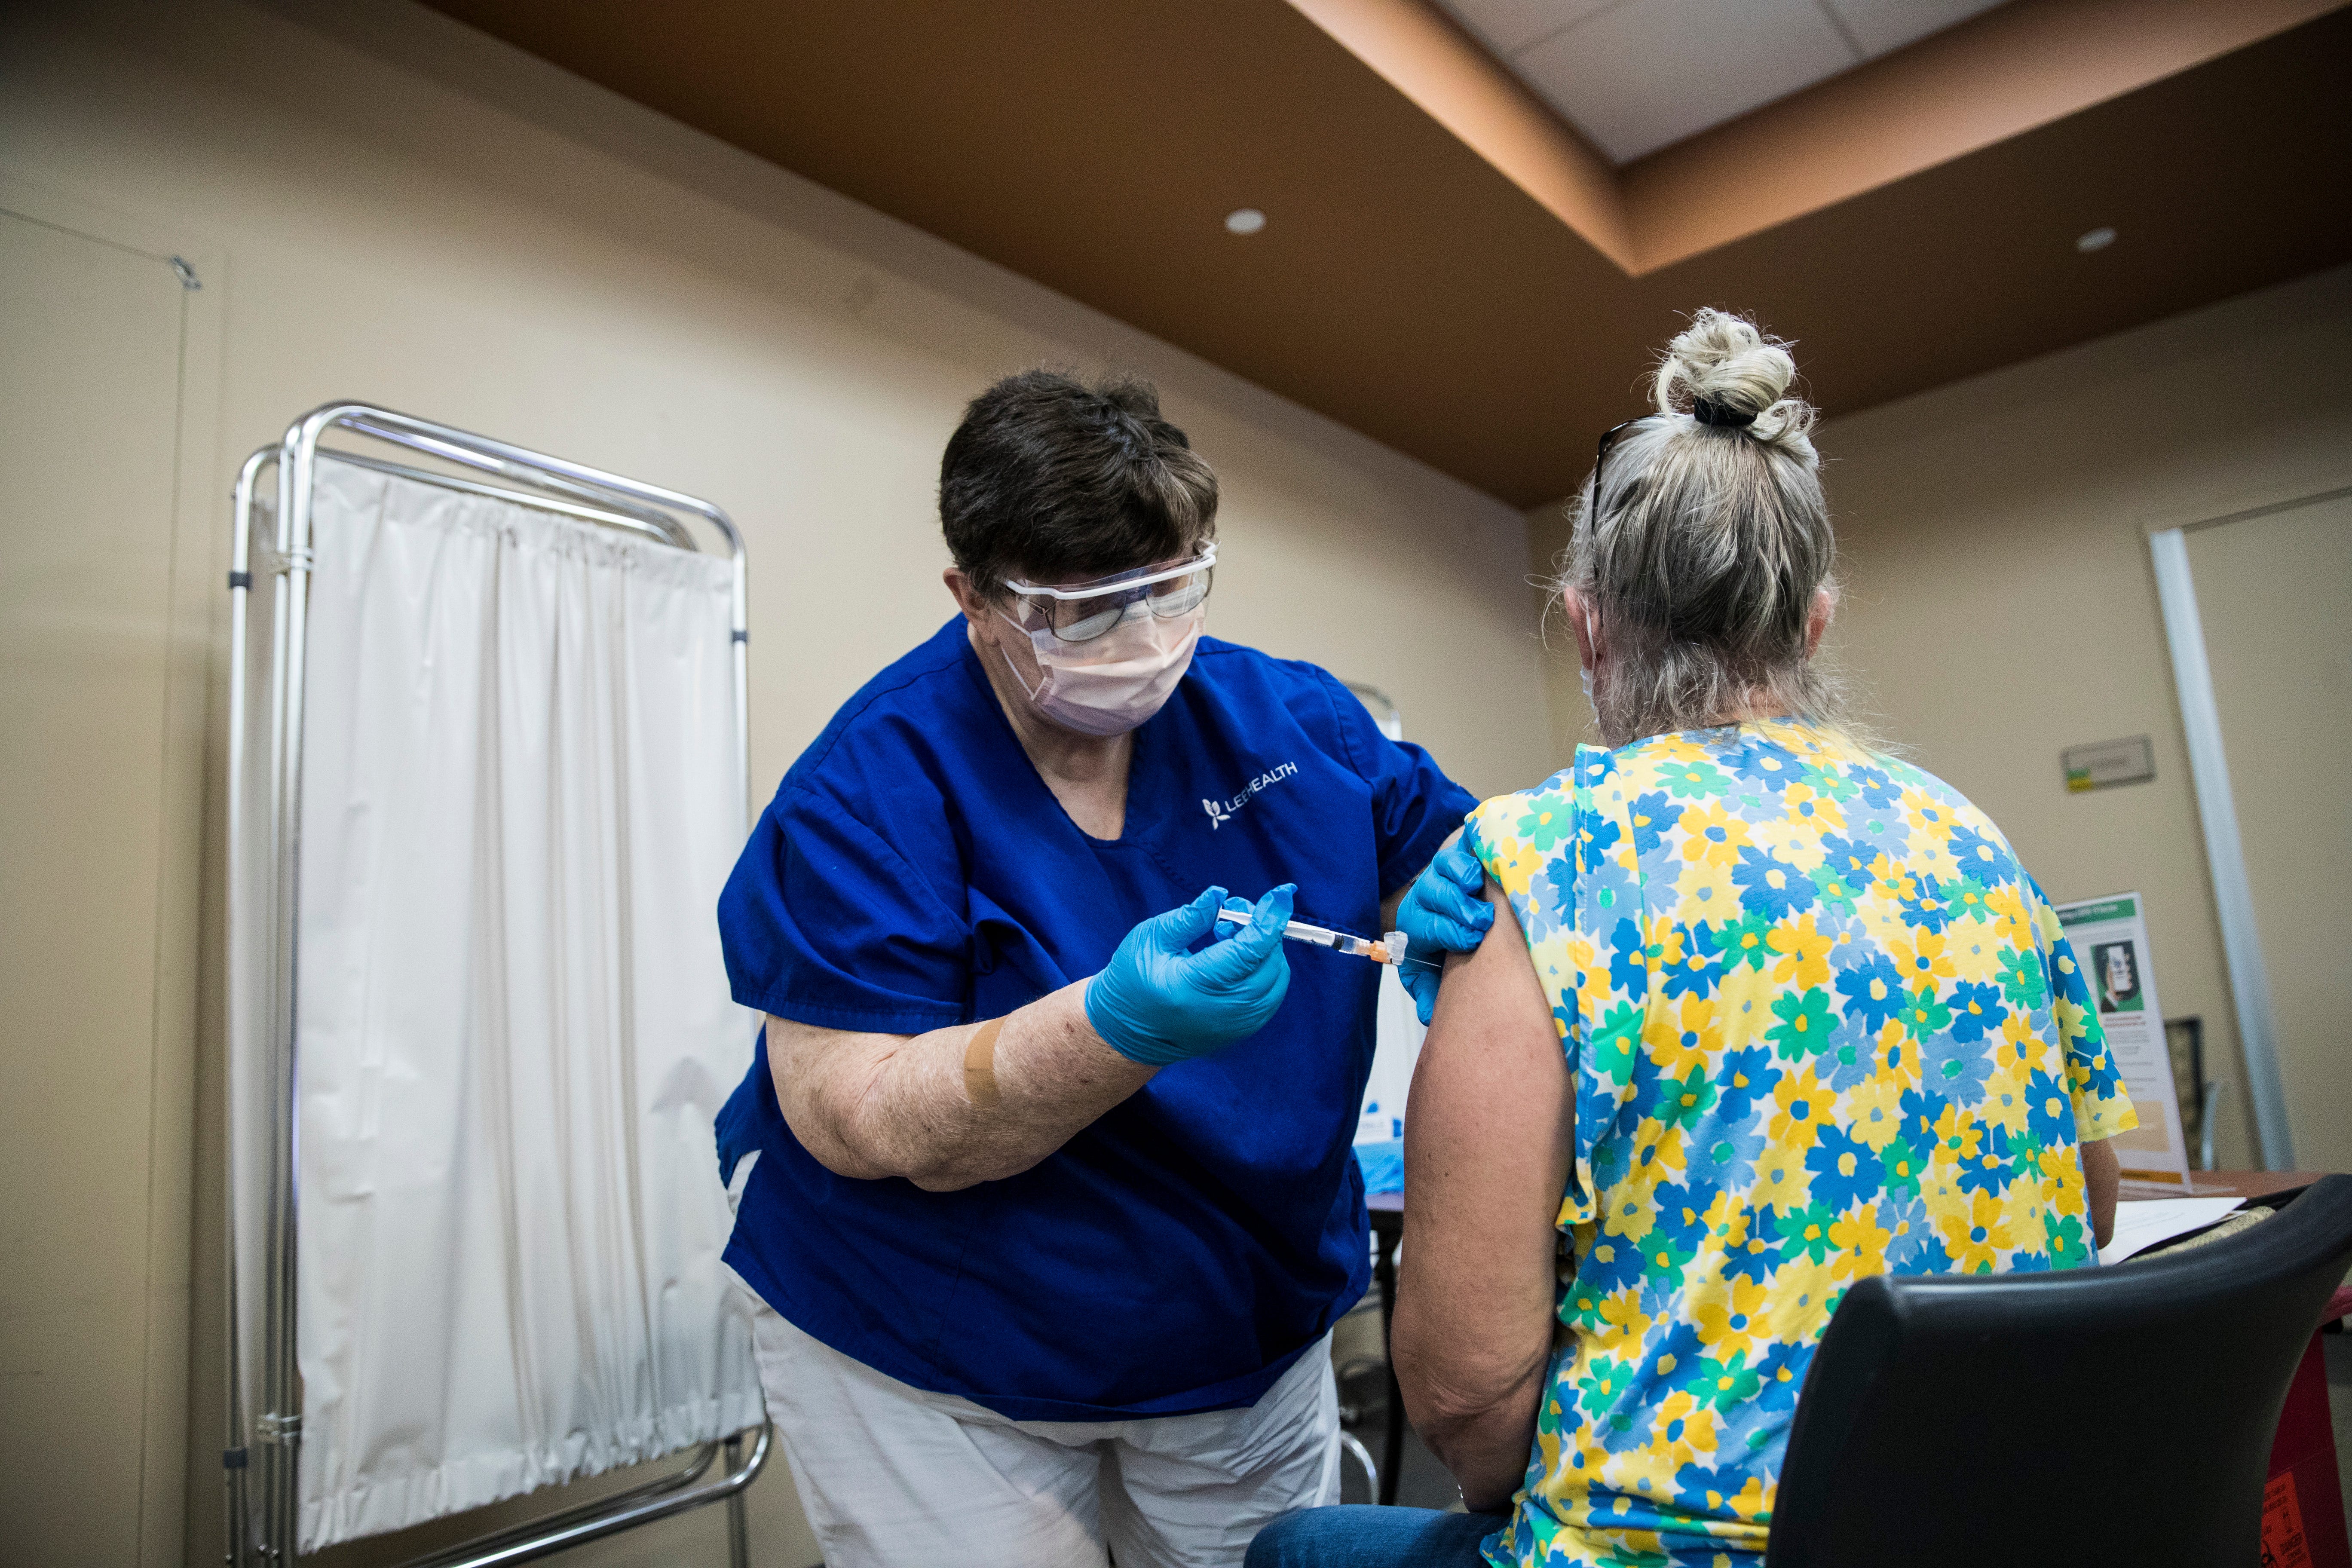 Diane Corrie, left, a registered nurse at Gulf Coast Medical Center, vaccinates Johnna Michaelkiewicz for COVID-19 at a vaccination site on the campus on Friday, Aug. 13, 2021. Vaccinations are starting to tick up as the delta variant of COVID-19 is surging.